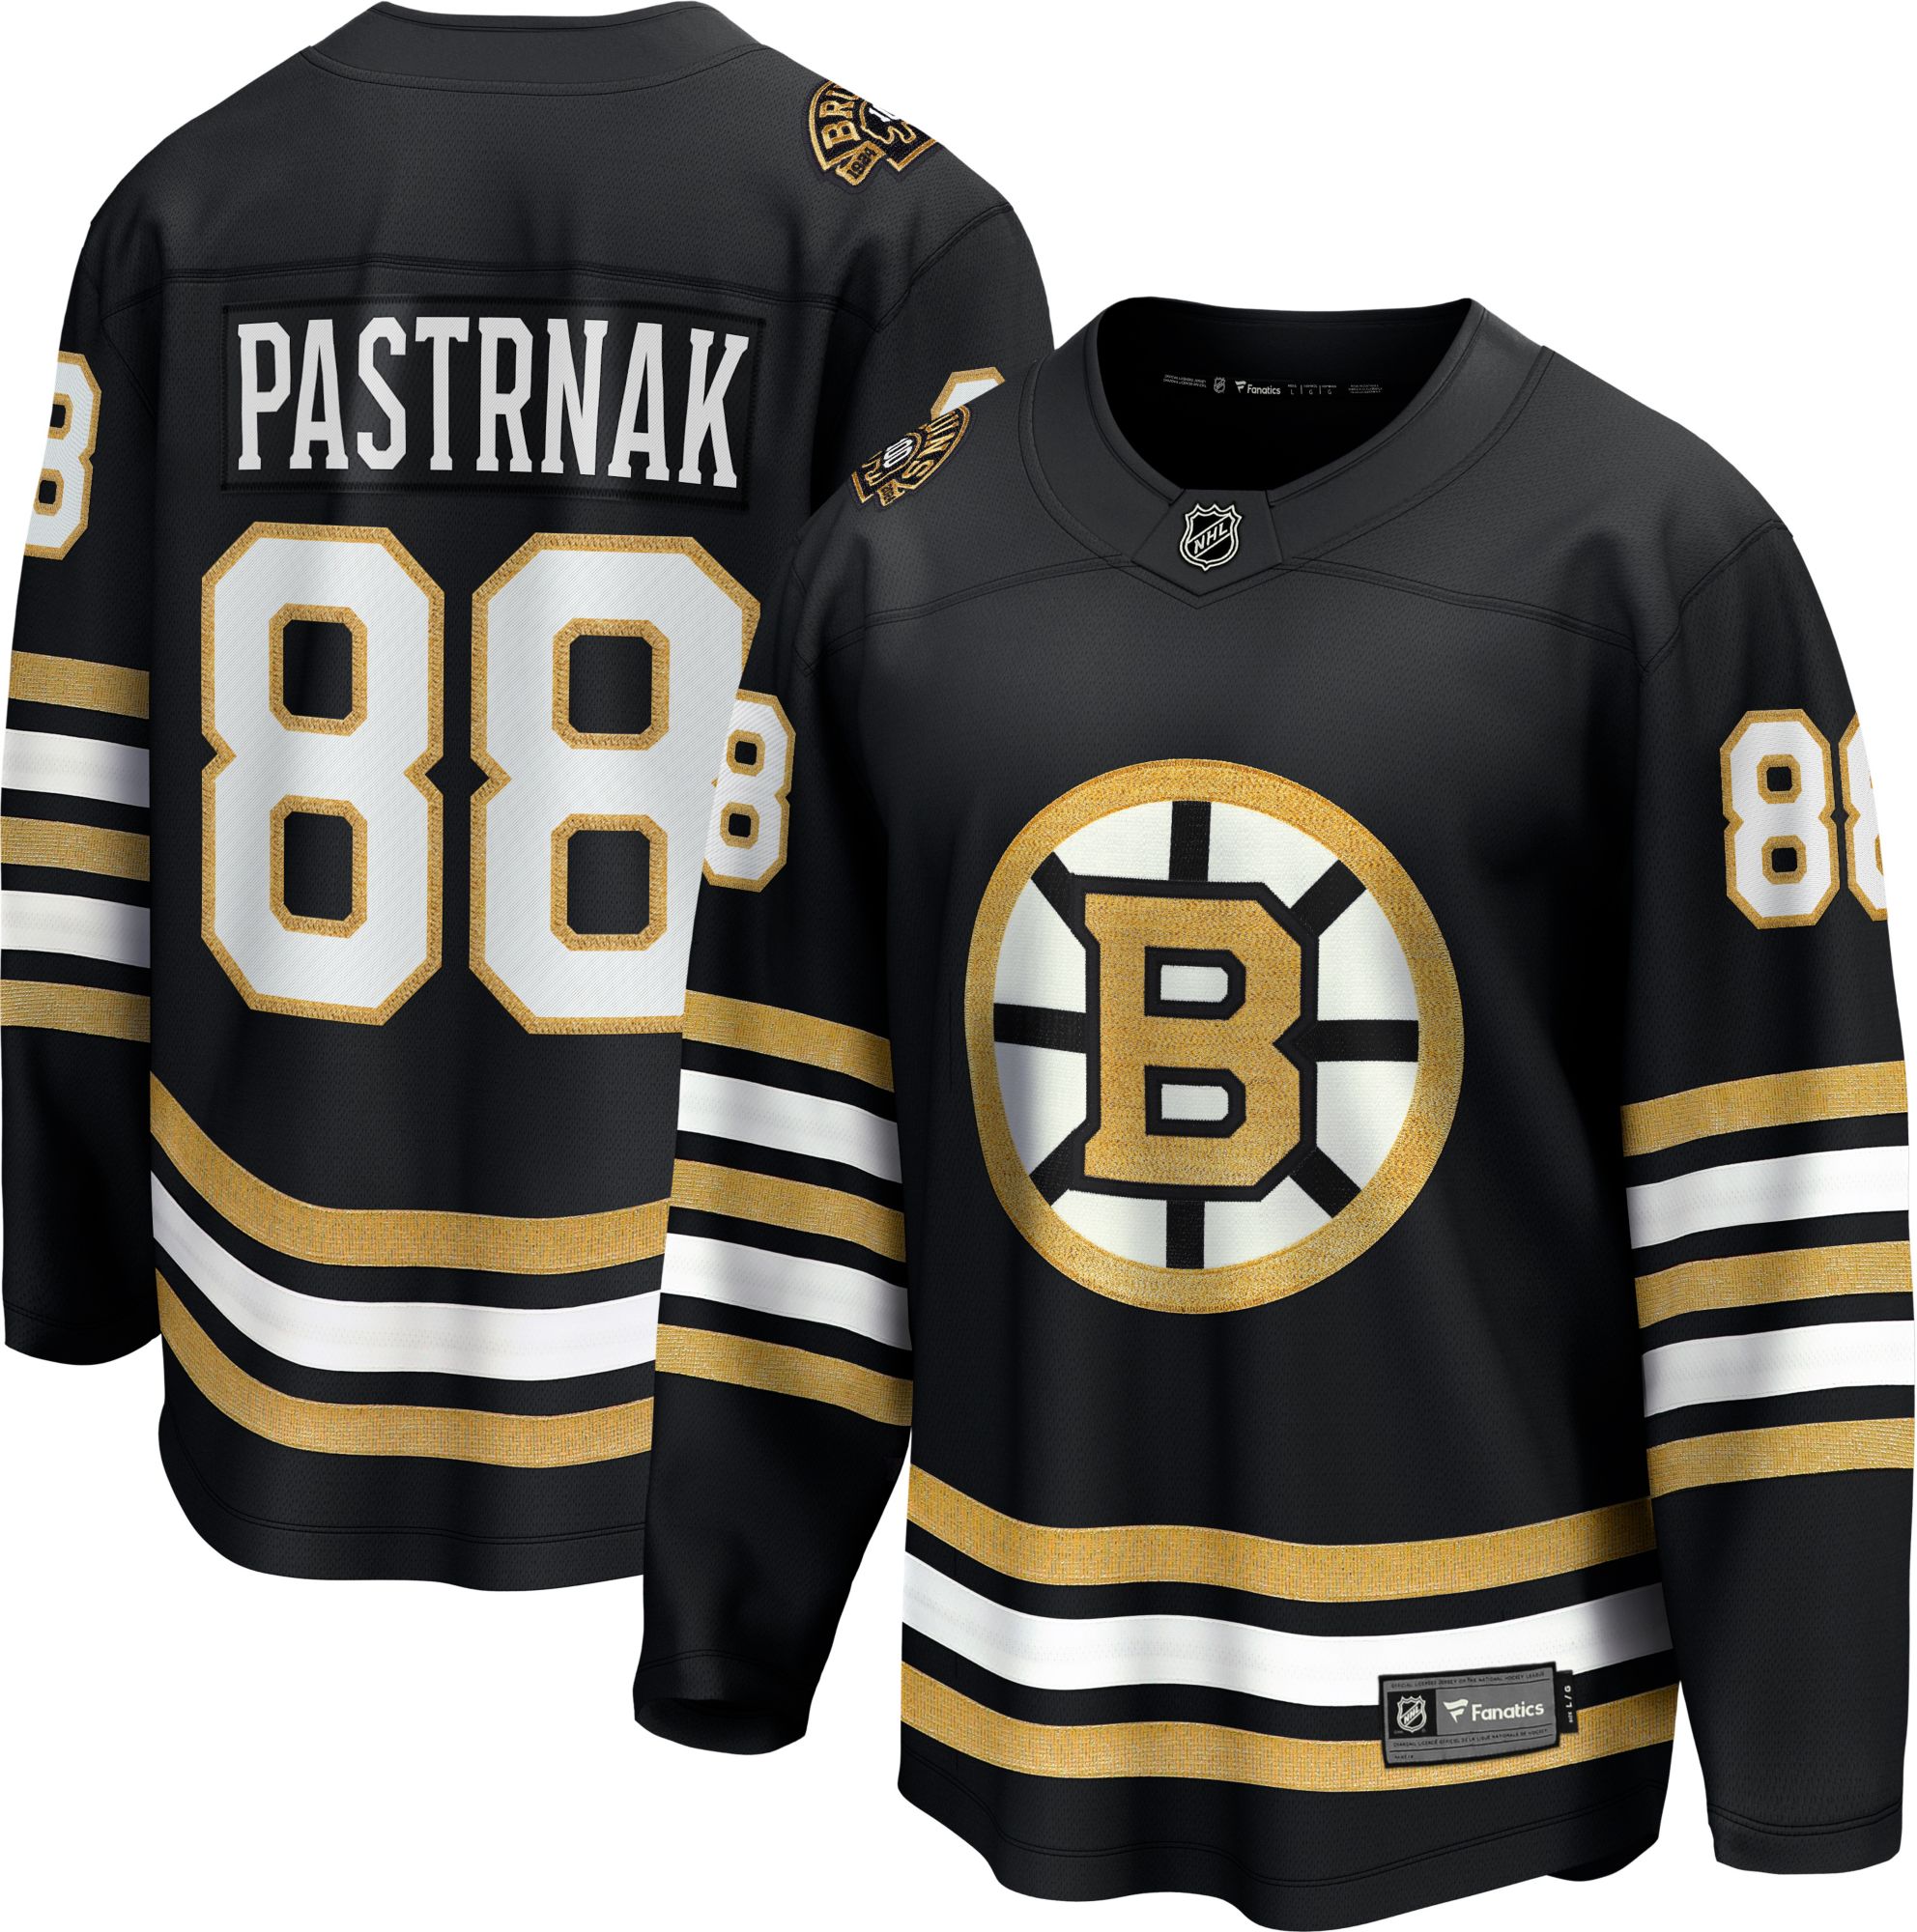 NHL Jerseys for sale in Gritney, Florida